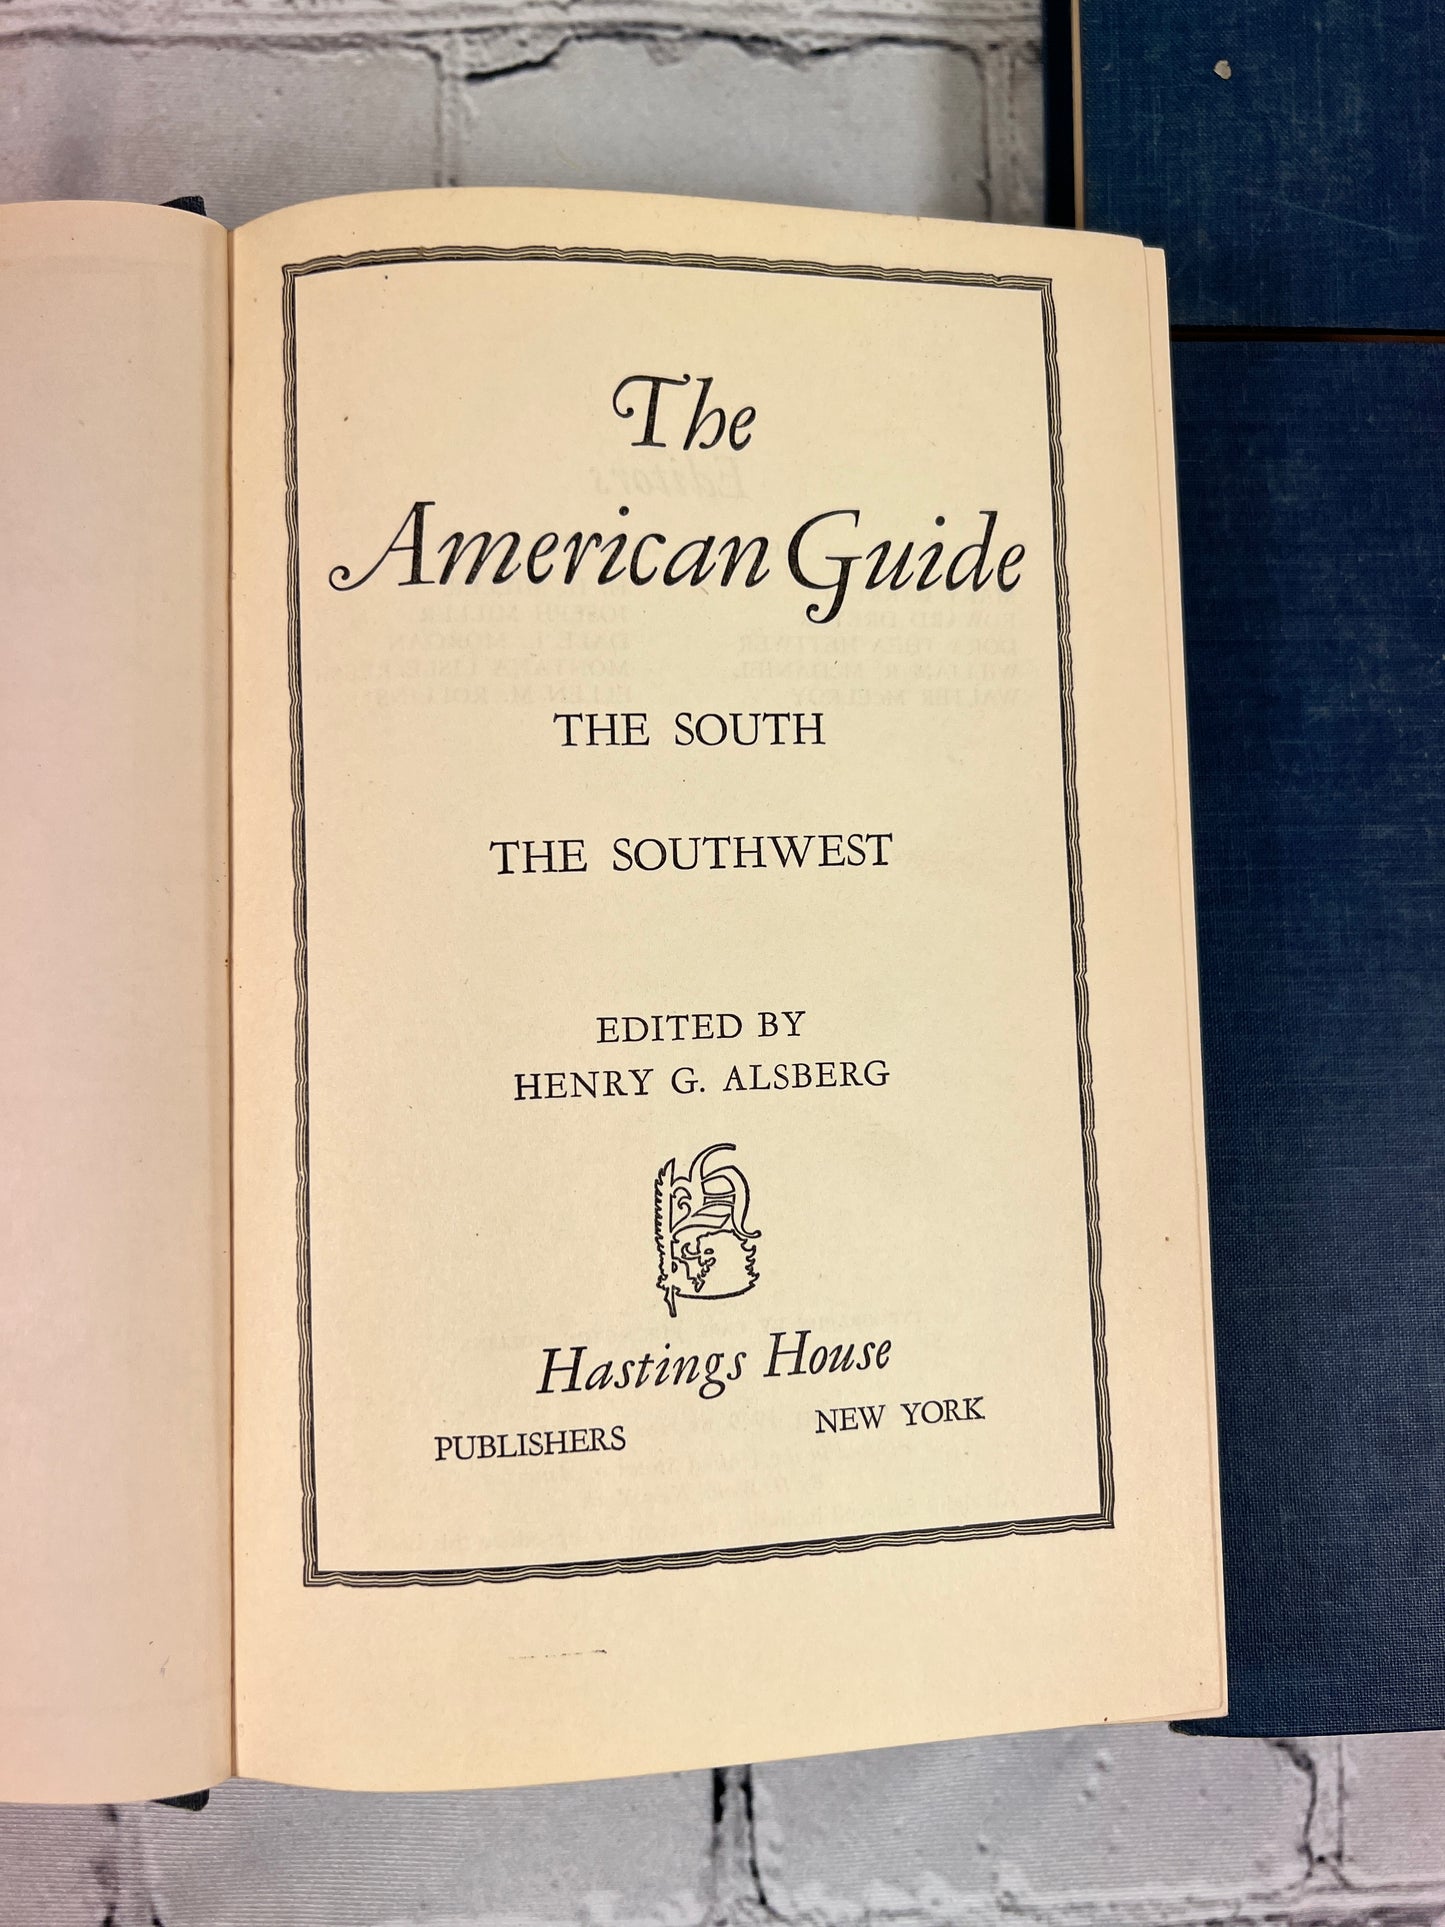 The American Guide Source Book and Complete Travel Guide for the U.S. [1949]